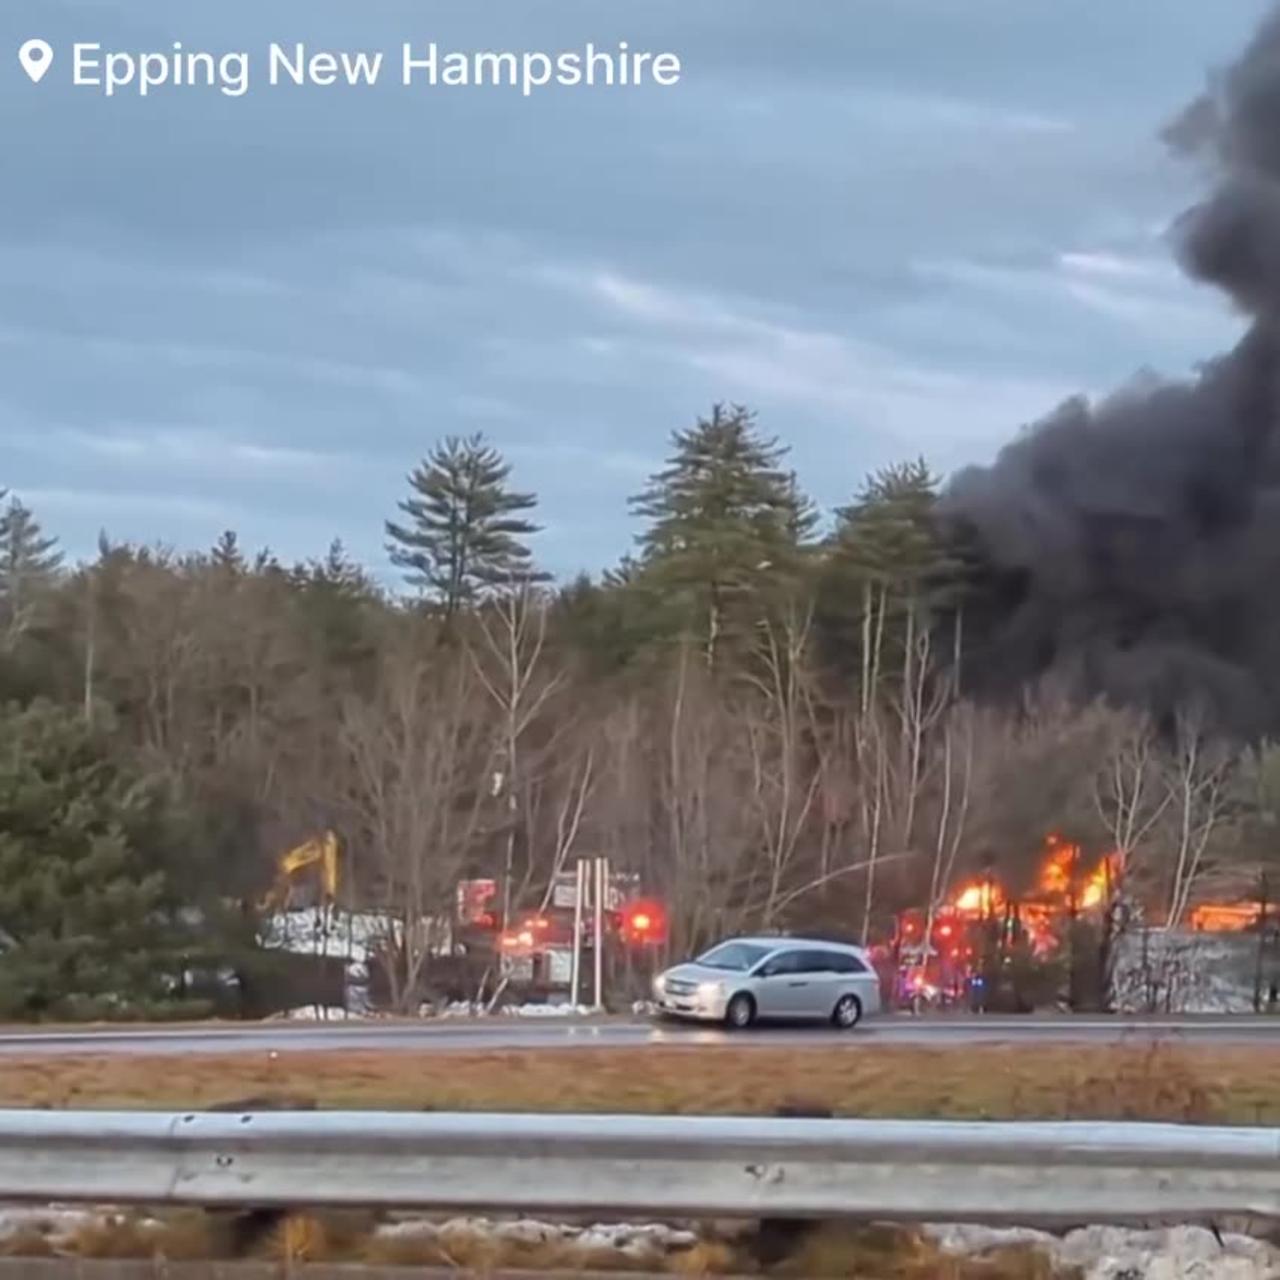 Multiple Oil tanker trucks have caught on fire with reports of large explosions taking place